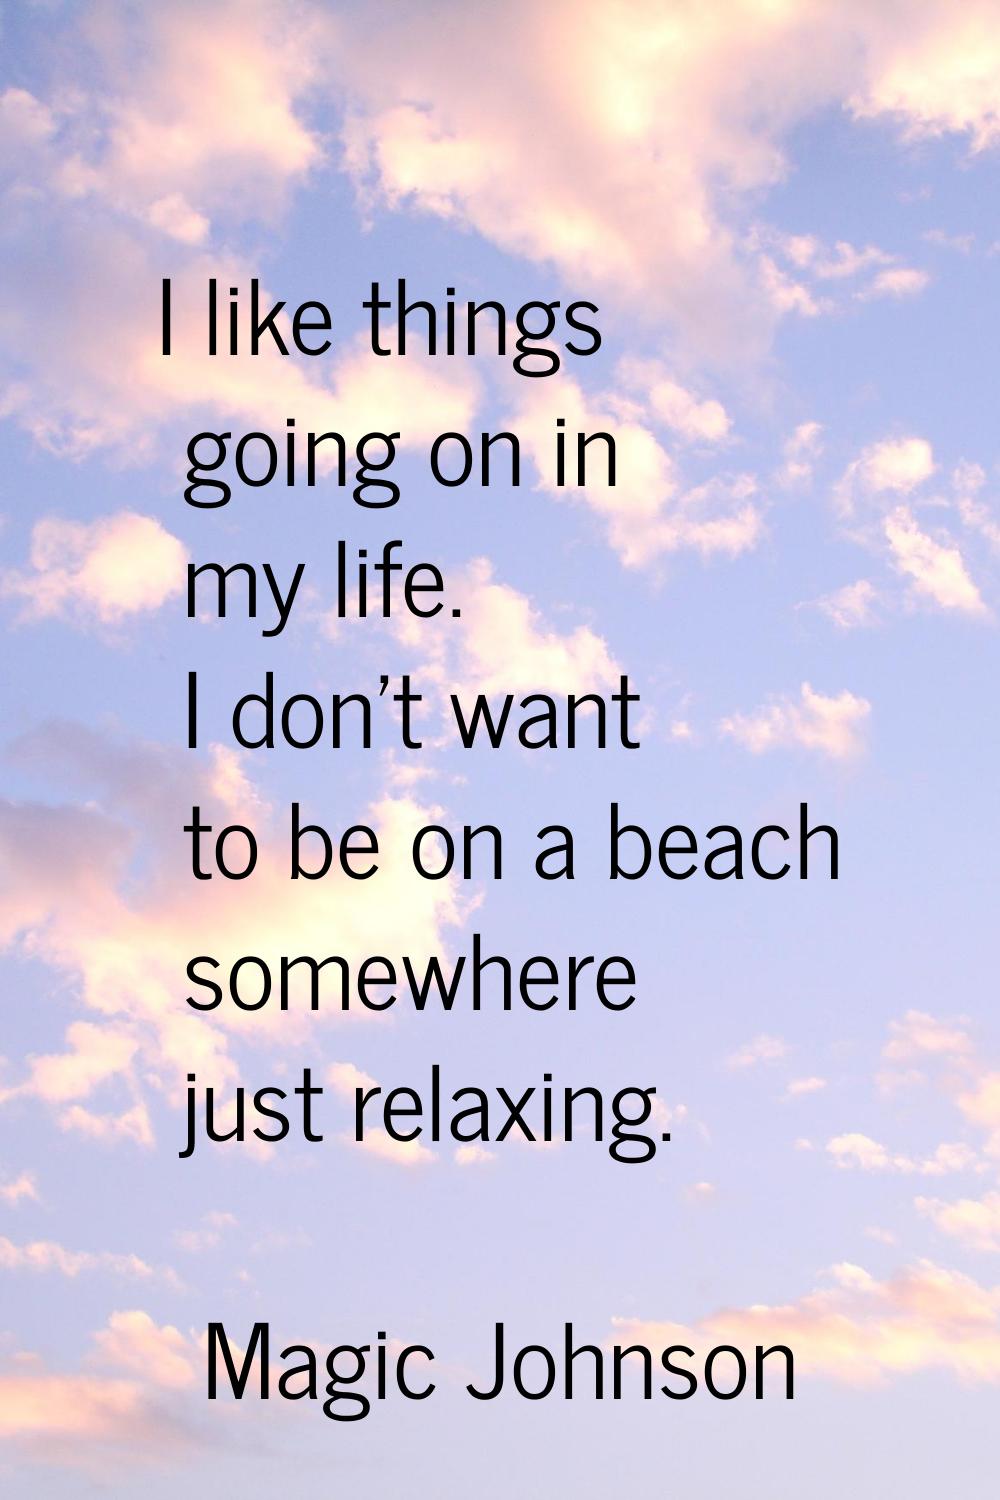 I like things going on in my life. I don't want to be on a beach somewhere just relaxing.